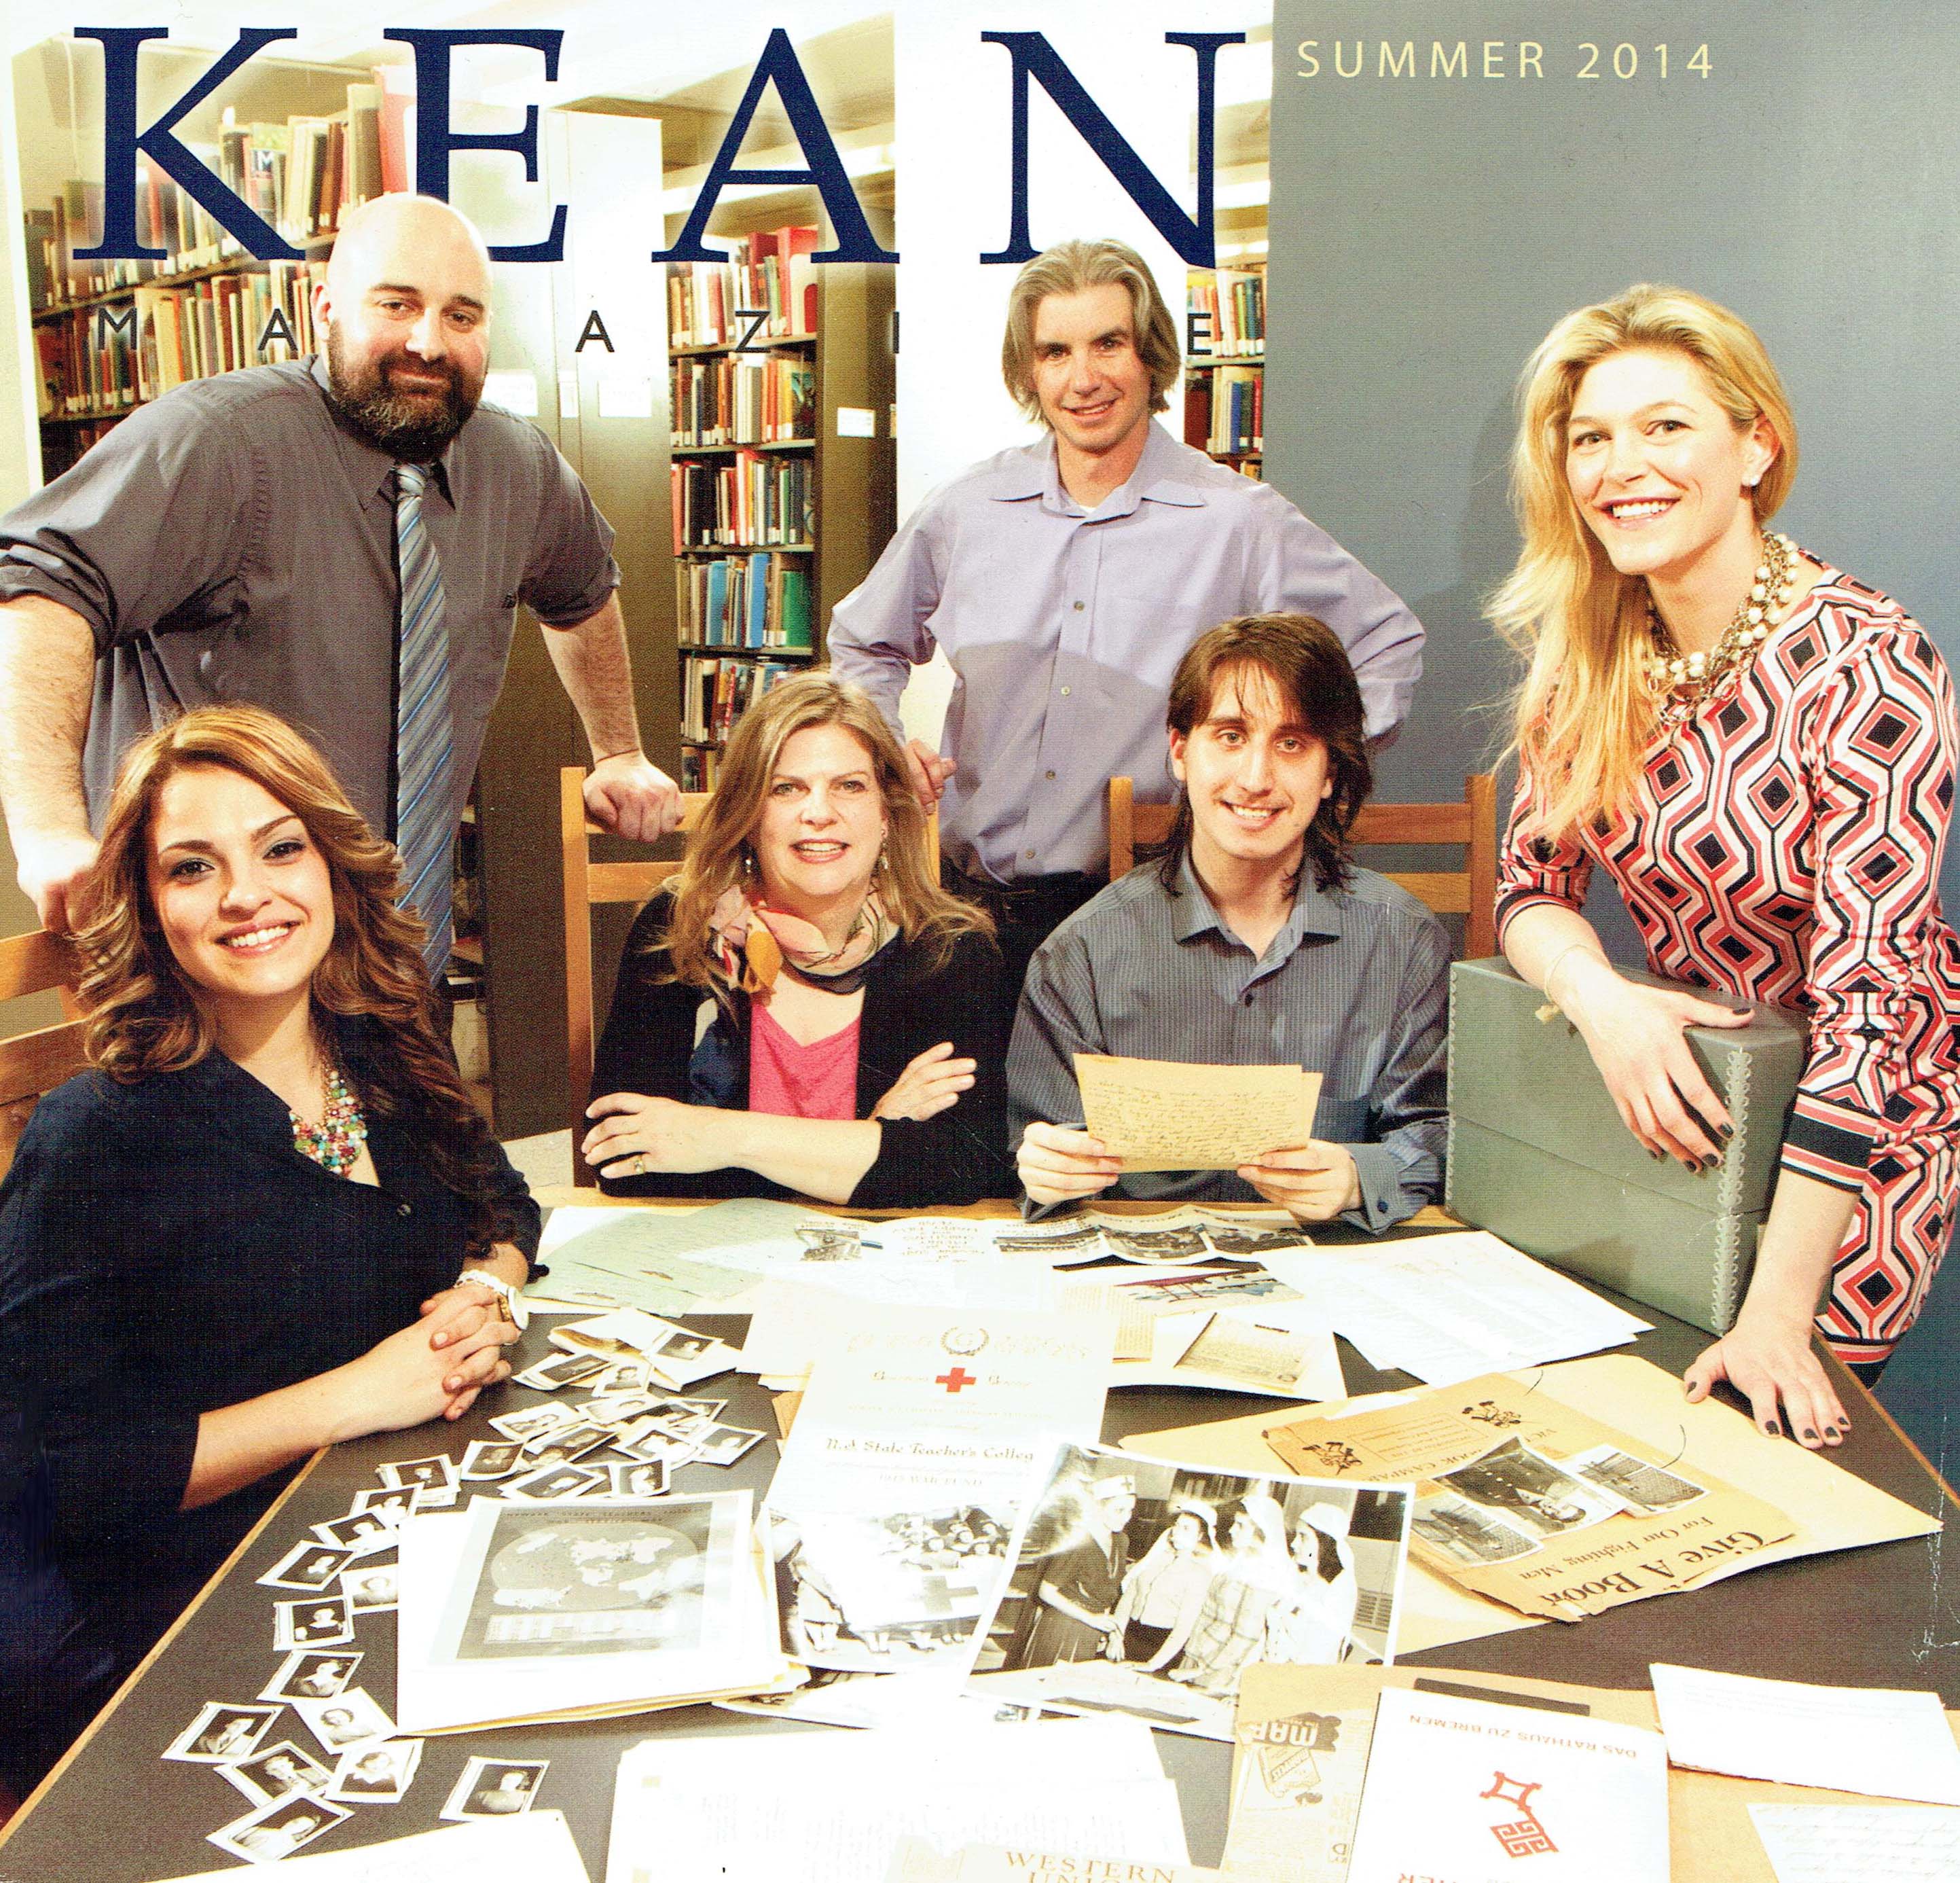 Photo of Kean History Dept Staff from the Summer 2014